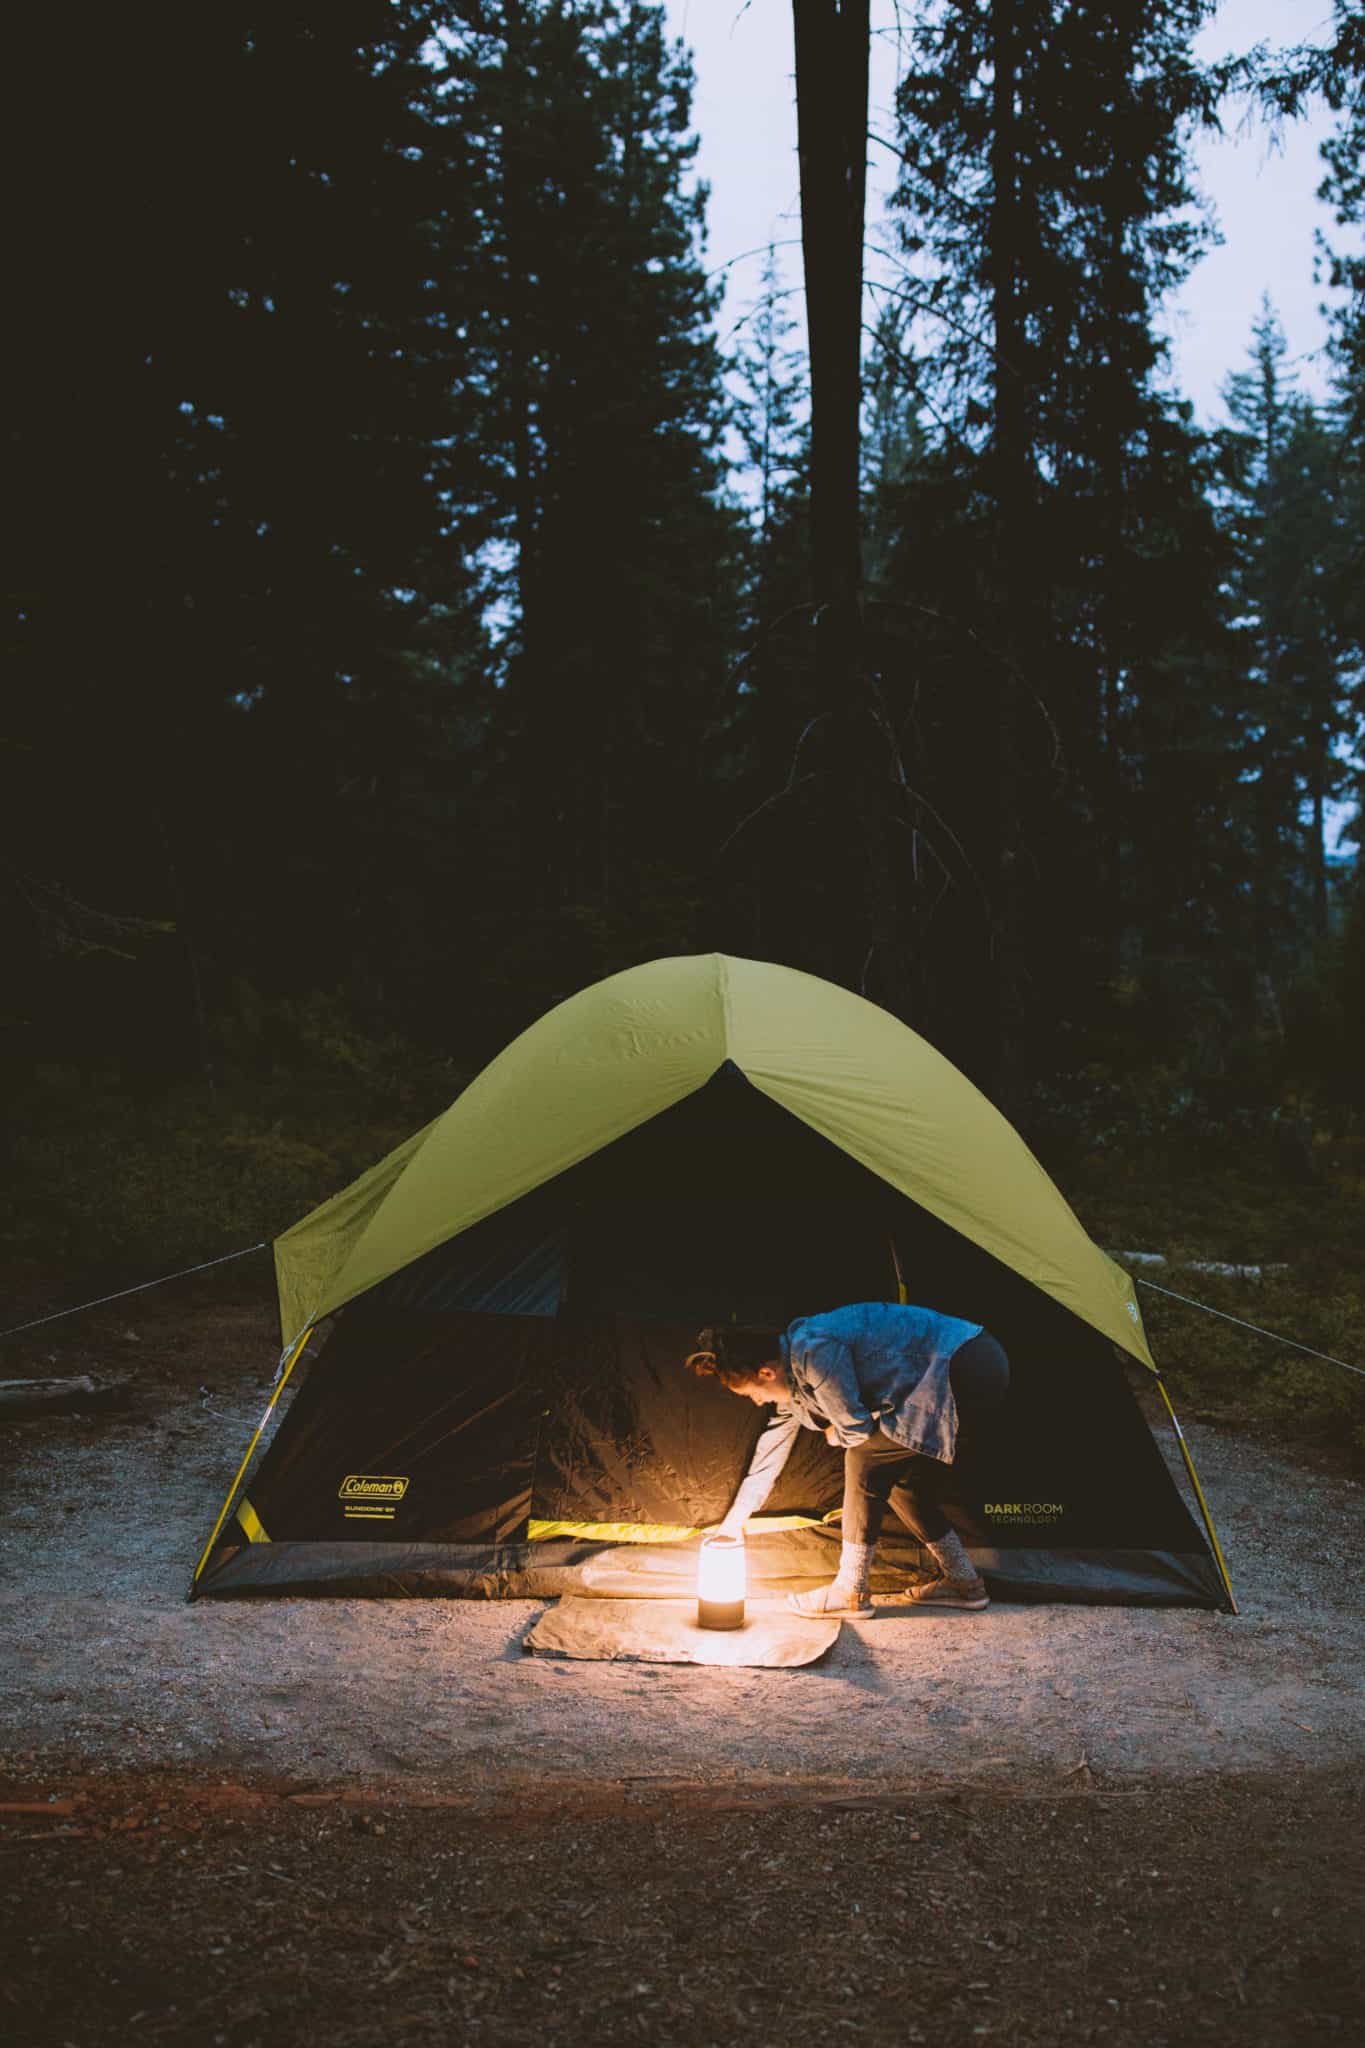 Camping tent at night with lantern